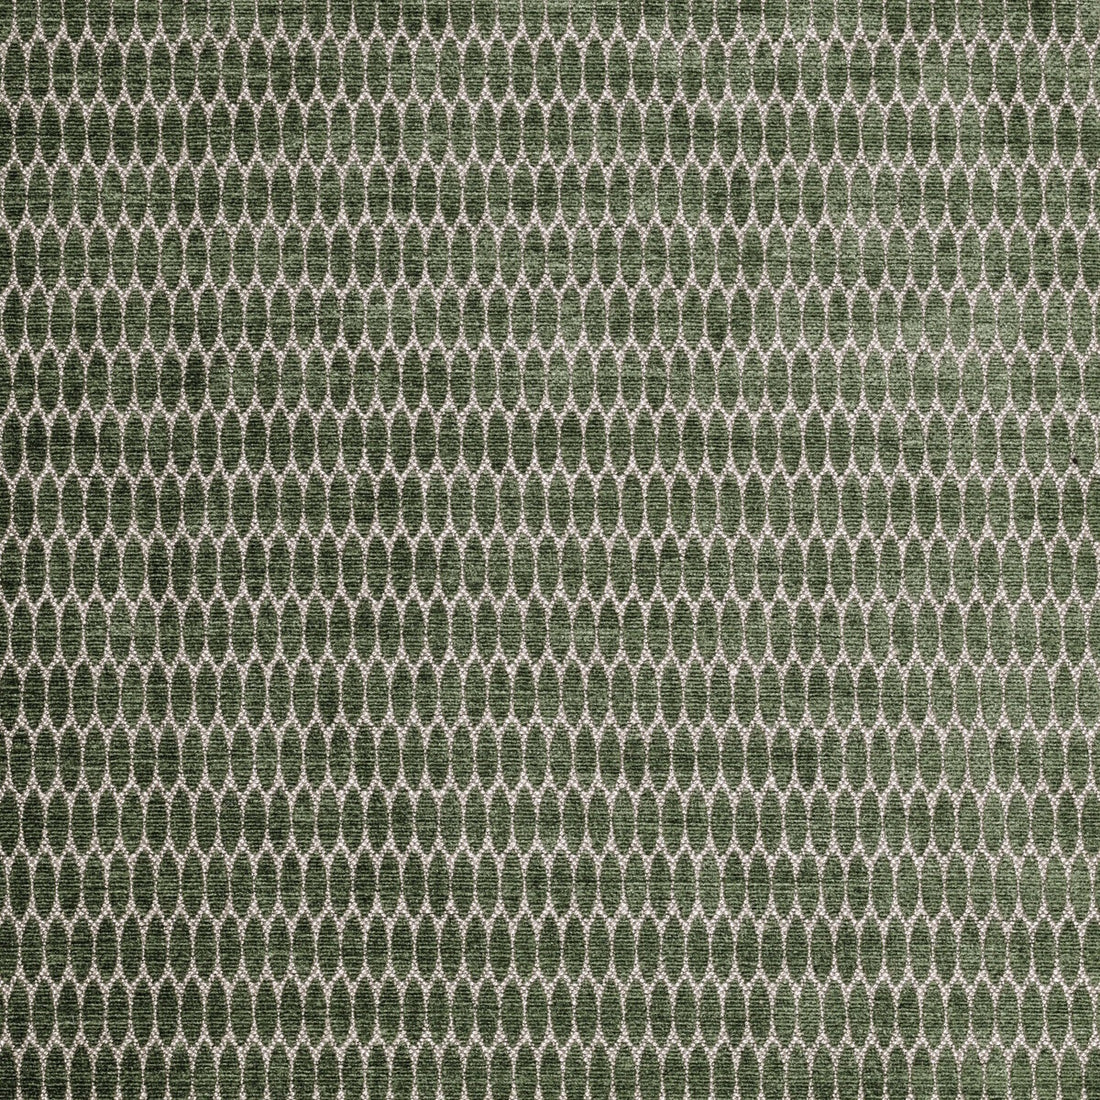 Compton fabric in leaf color - pattern BFC-3658.323.0 - by Lee Jofa in the Blithfield collection